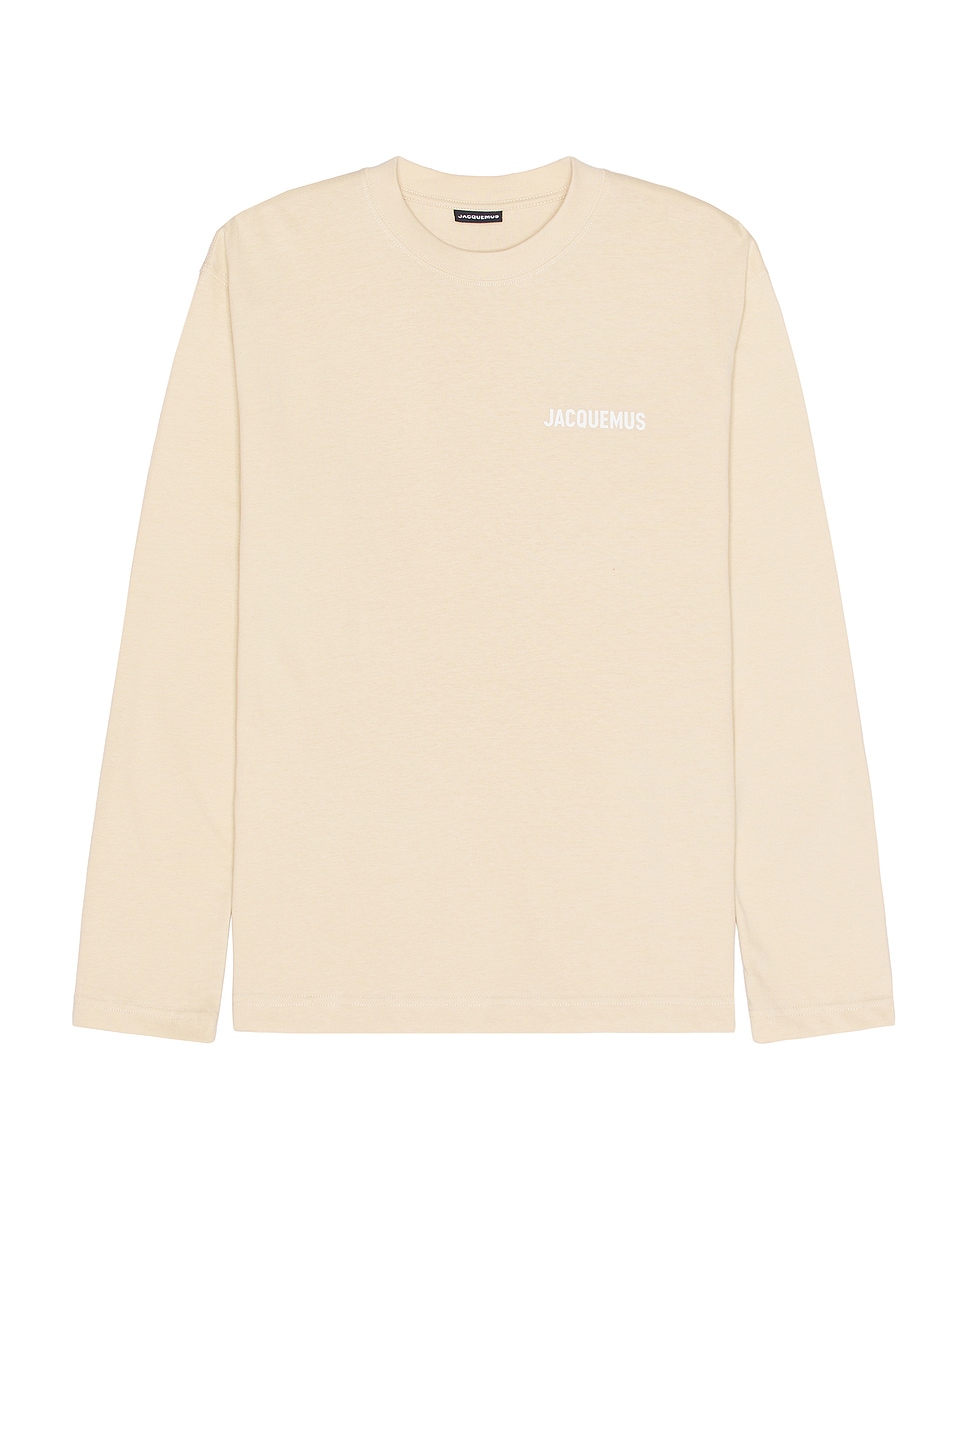 Image 1 of JACQUEMUS Le T-shirt Manches Longues in Light Beige